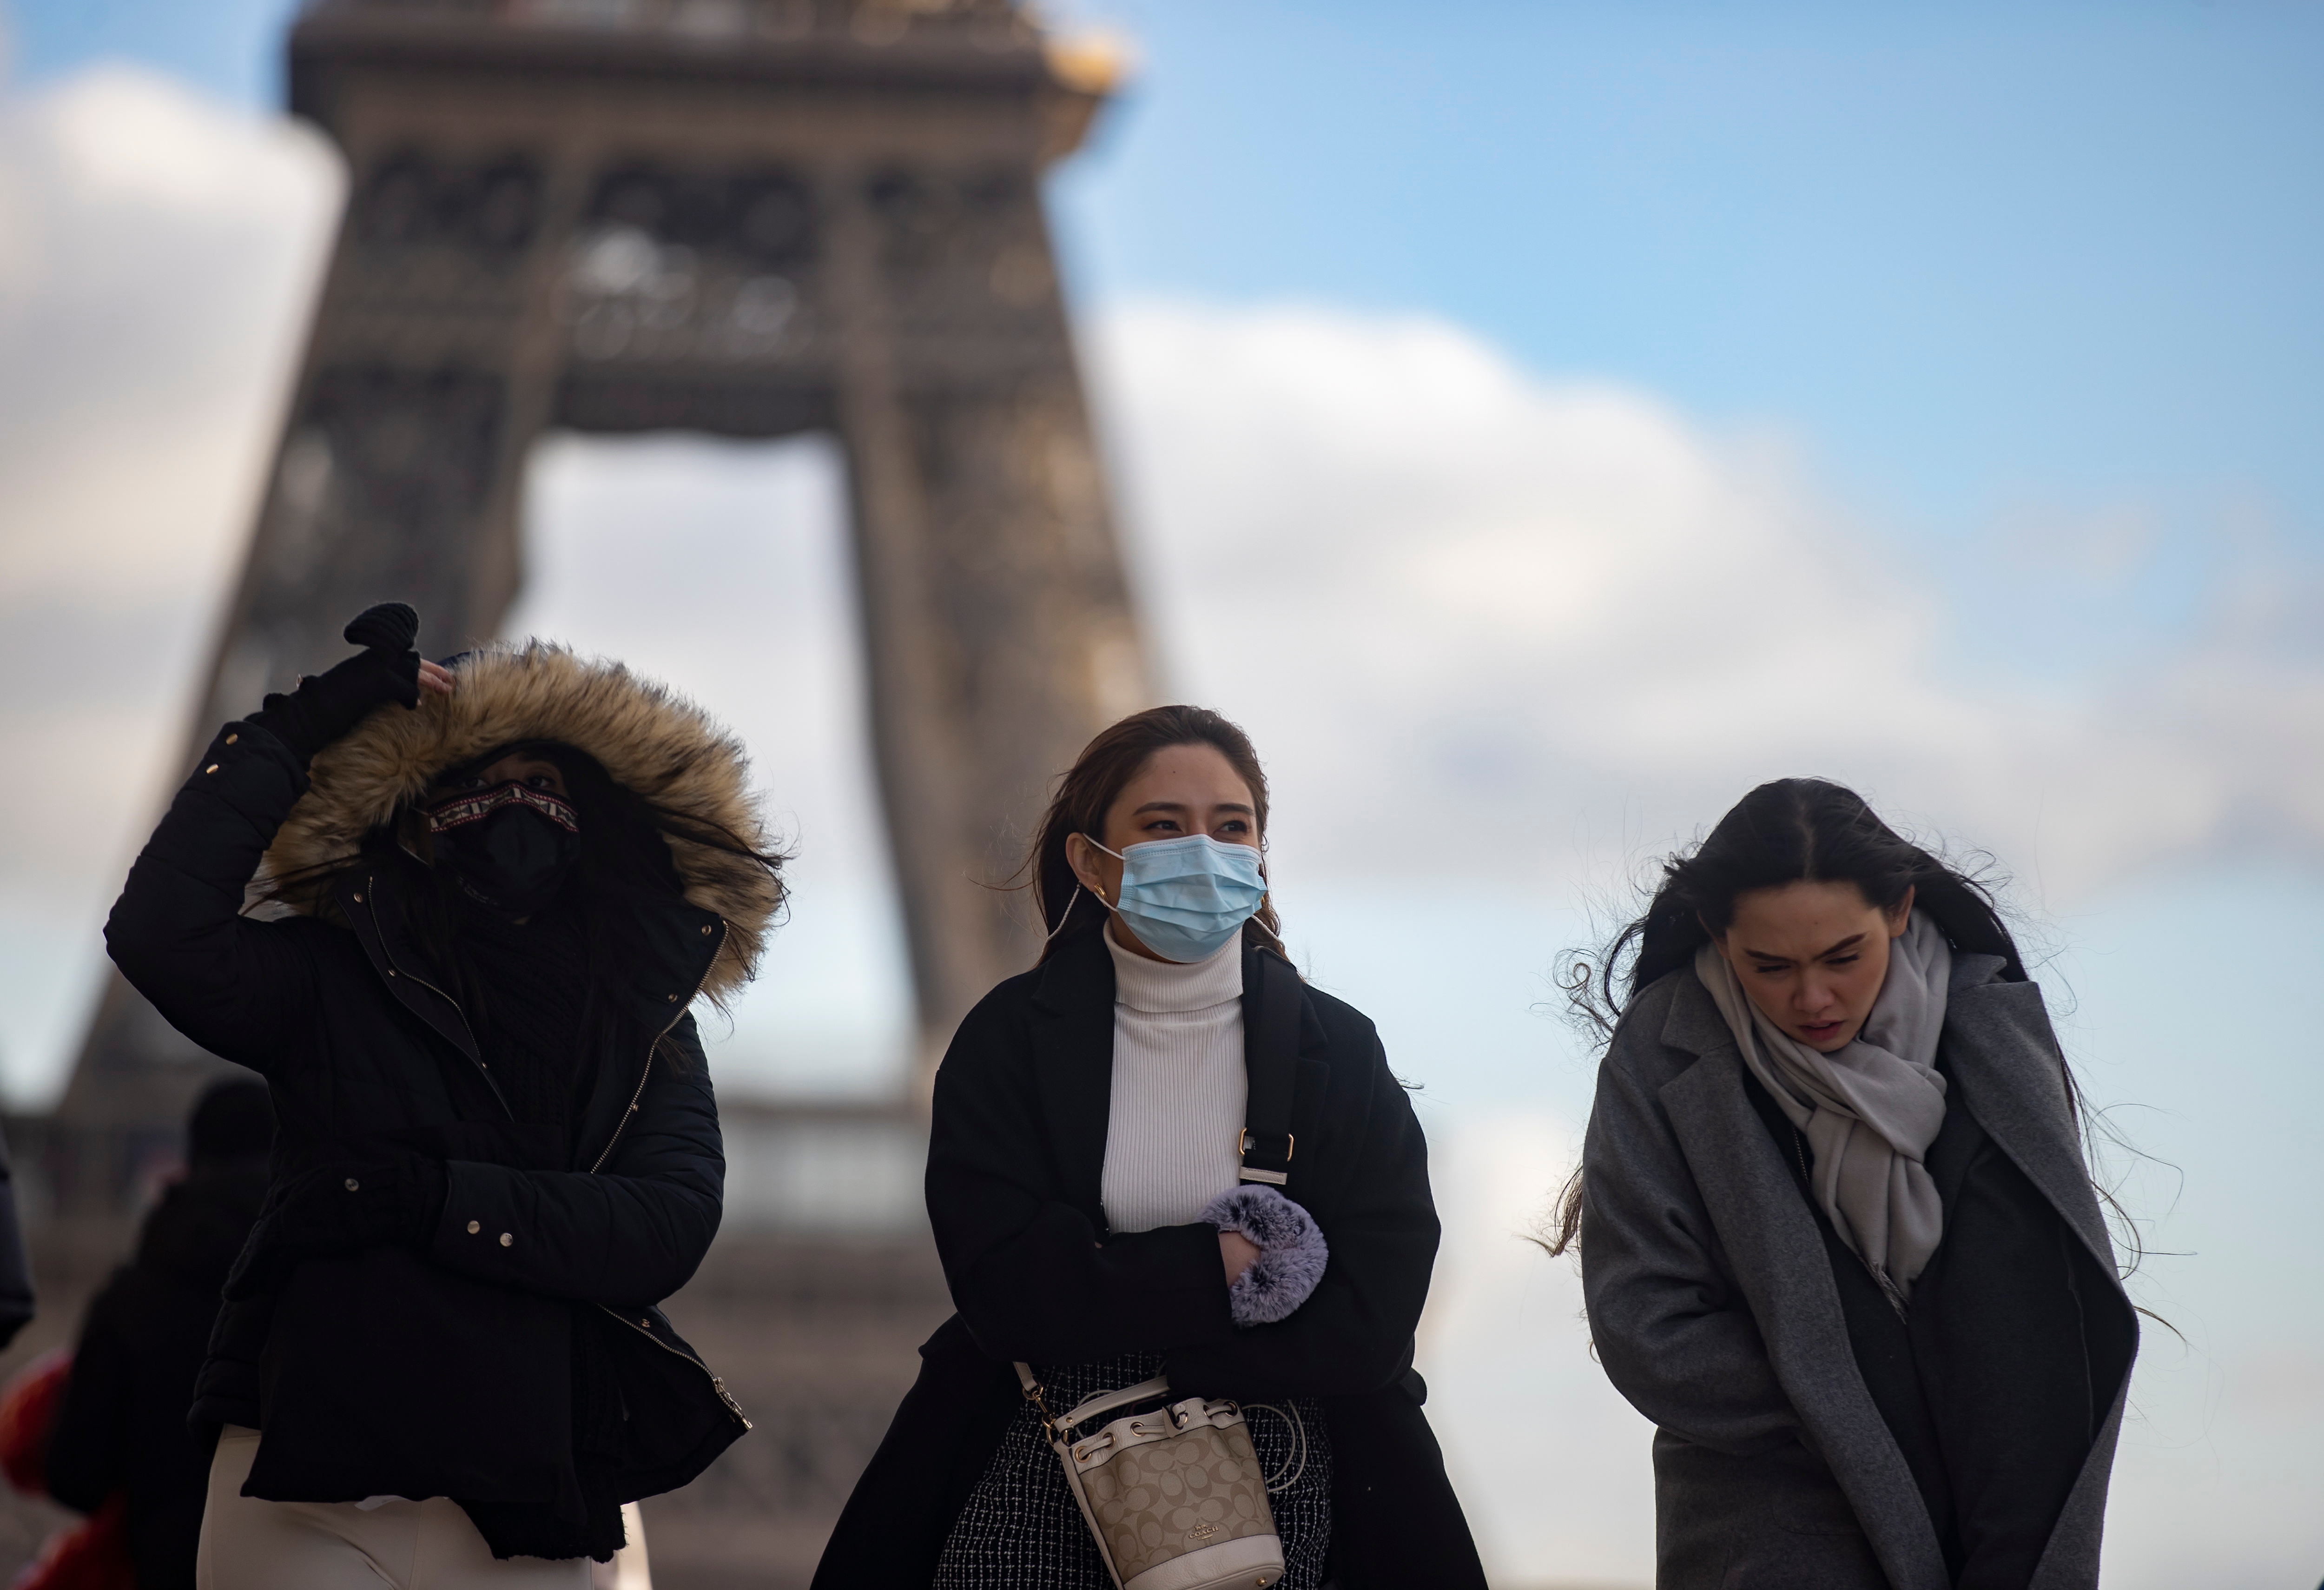 A group of masked young people walk through Paris, with the Eiffel Tower in the background.  EFE/EPA/IAN LANGSDON